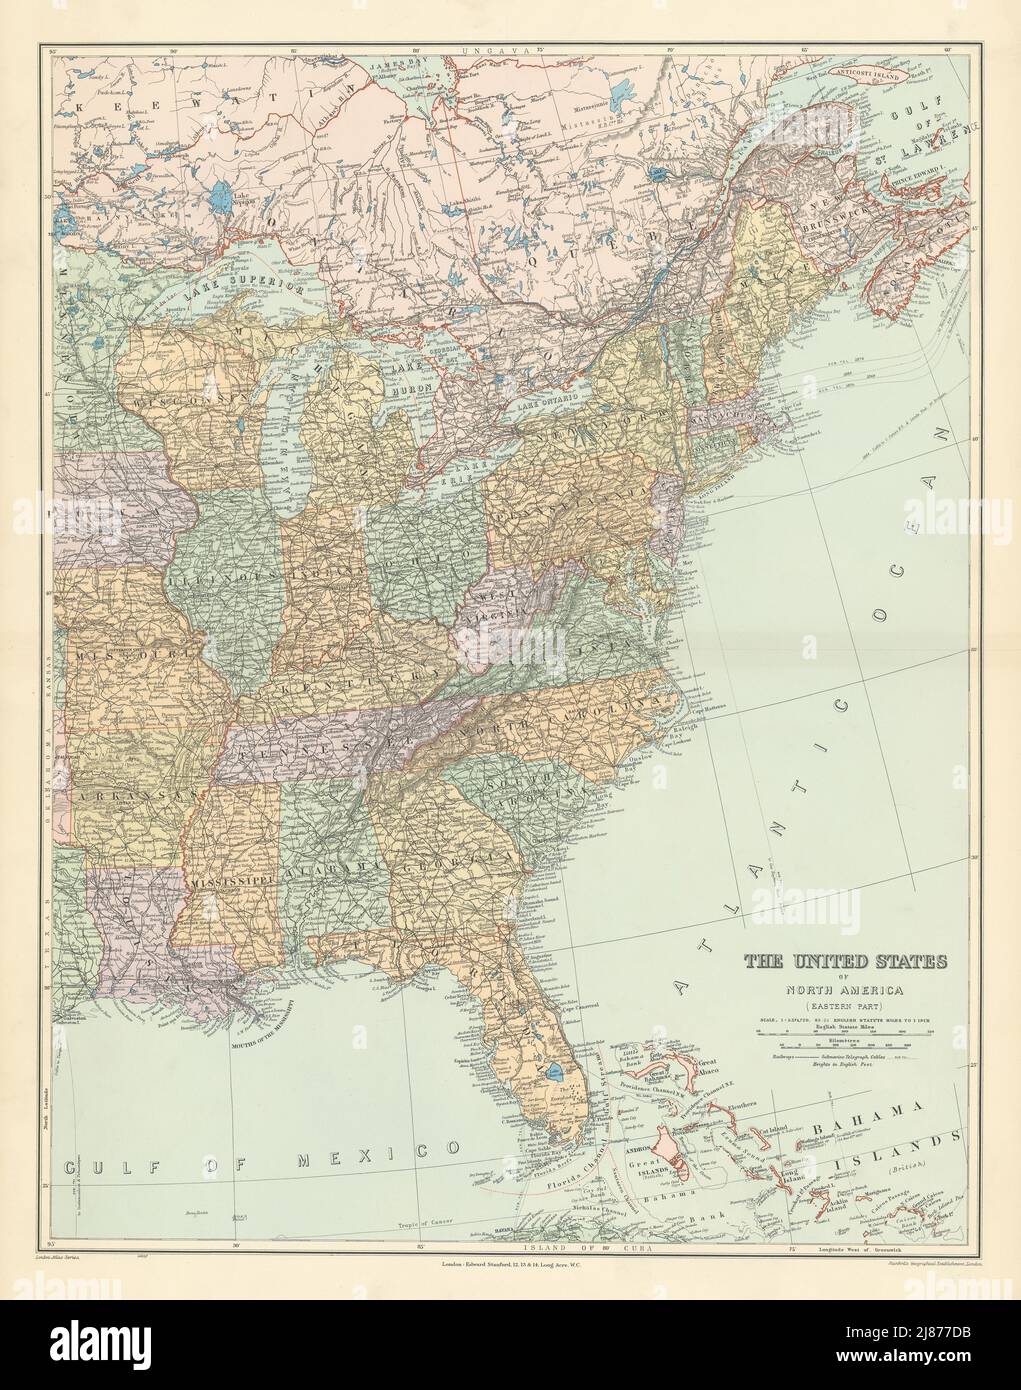 The United States of North America, Eastern part. USA. 69x54cm STANFORD 1904 map Stock Photo